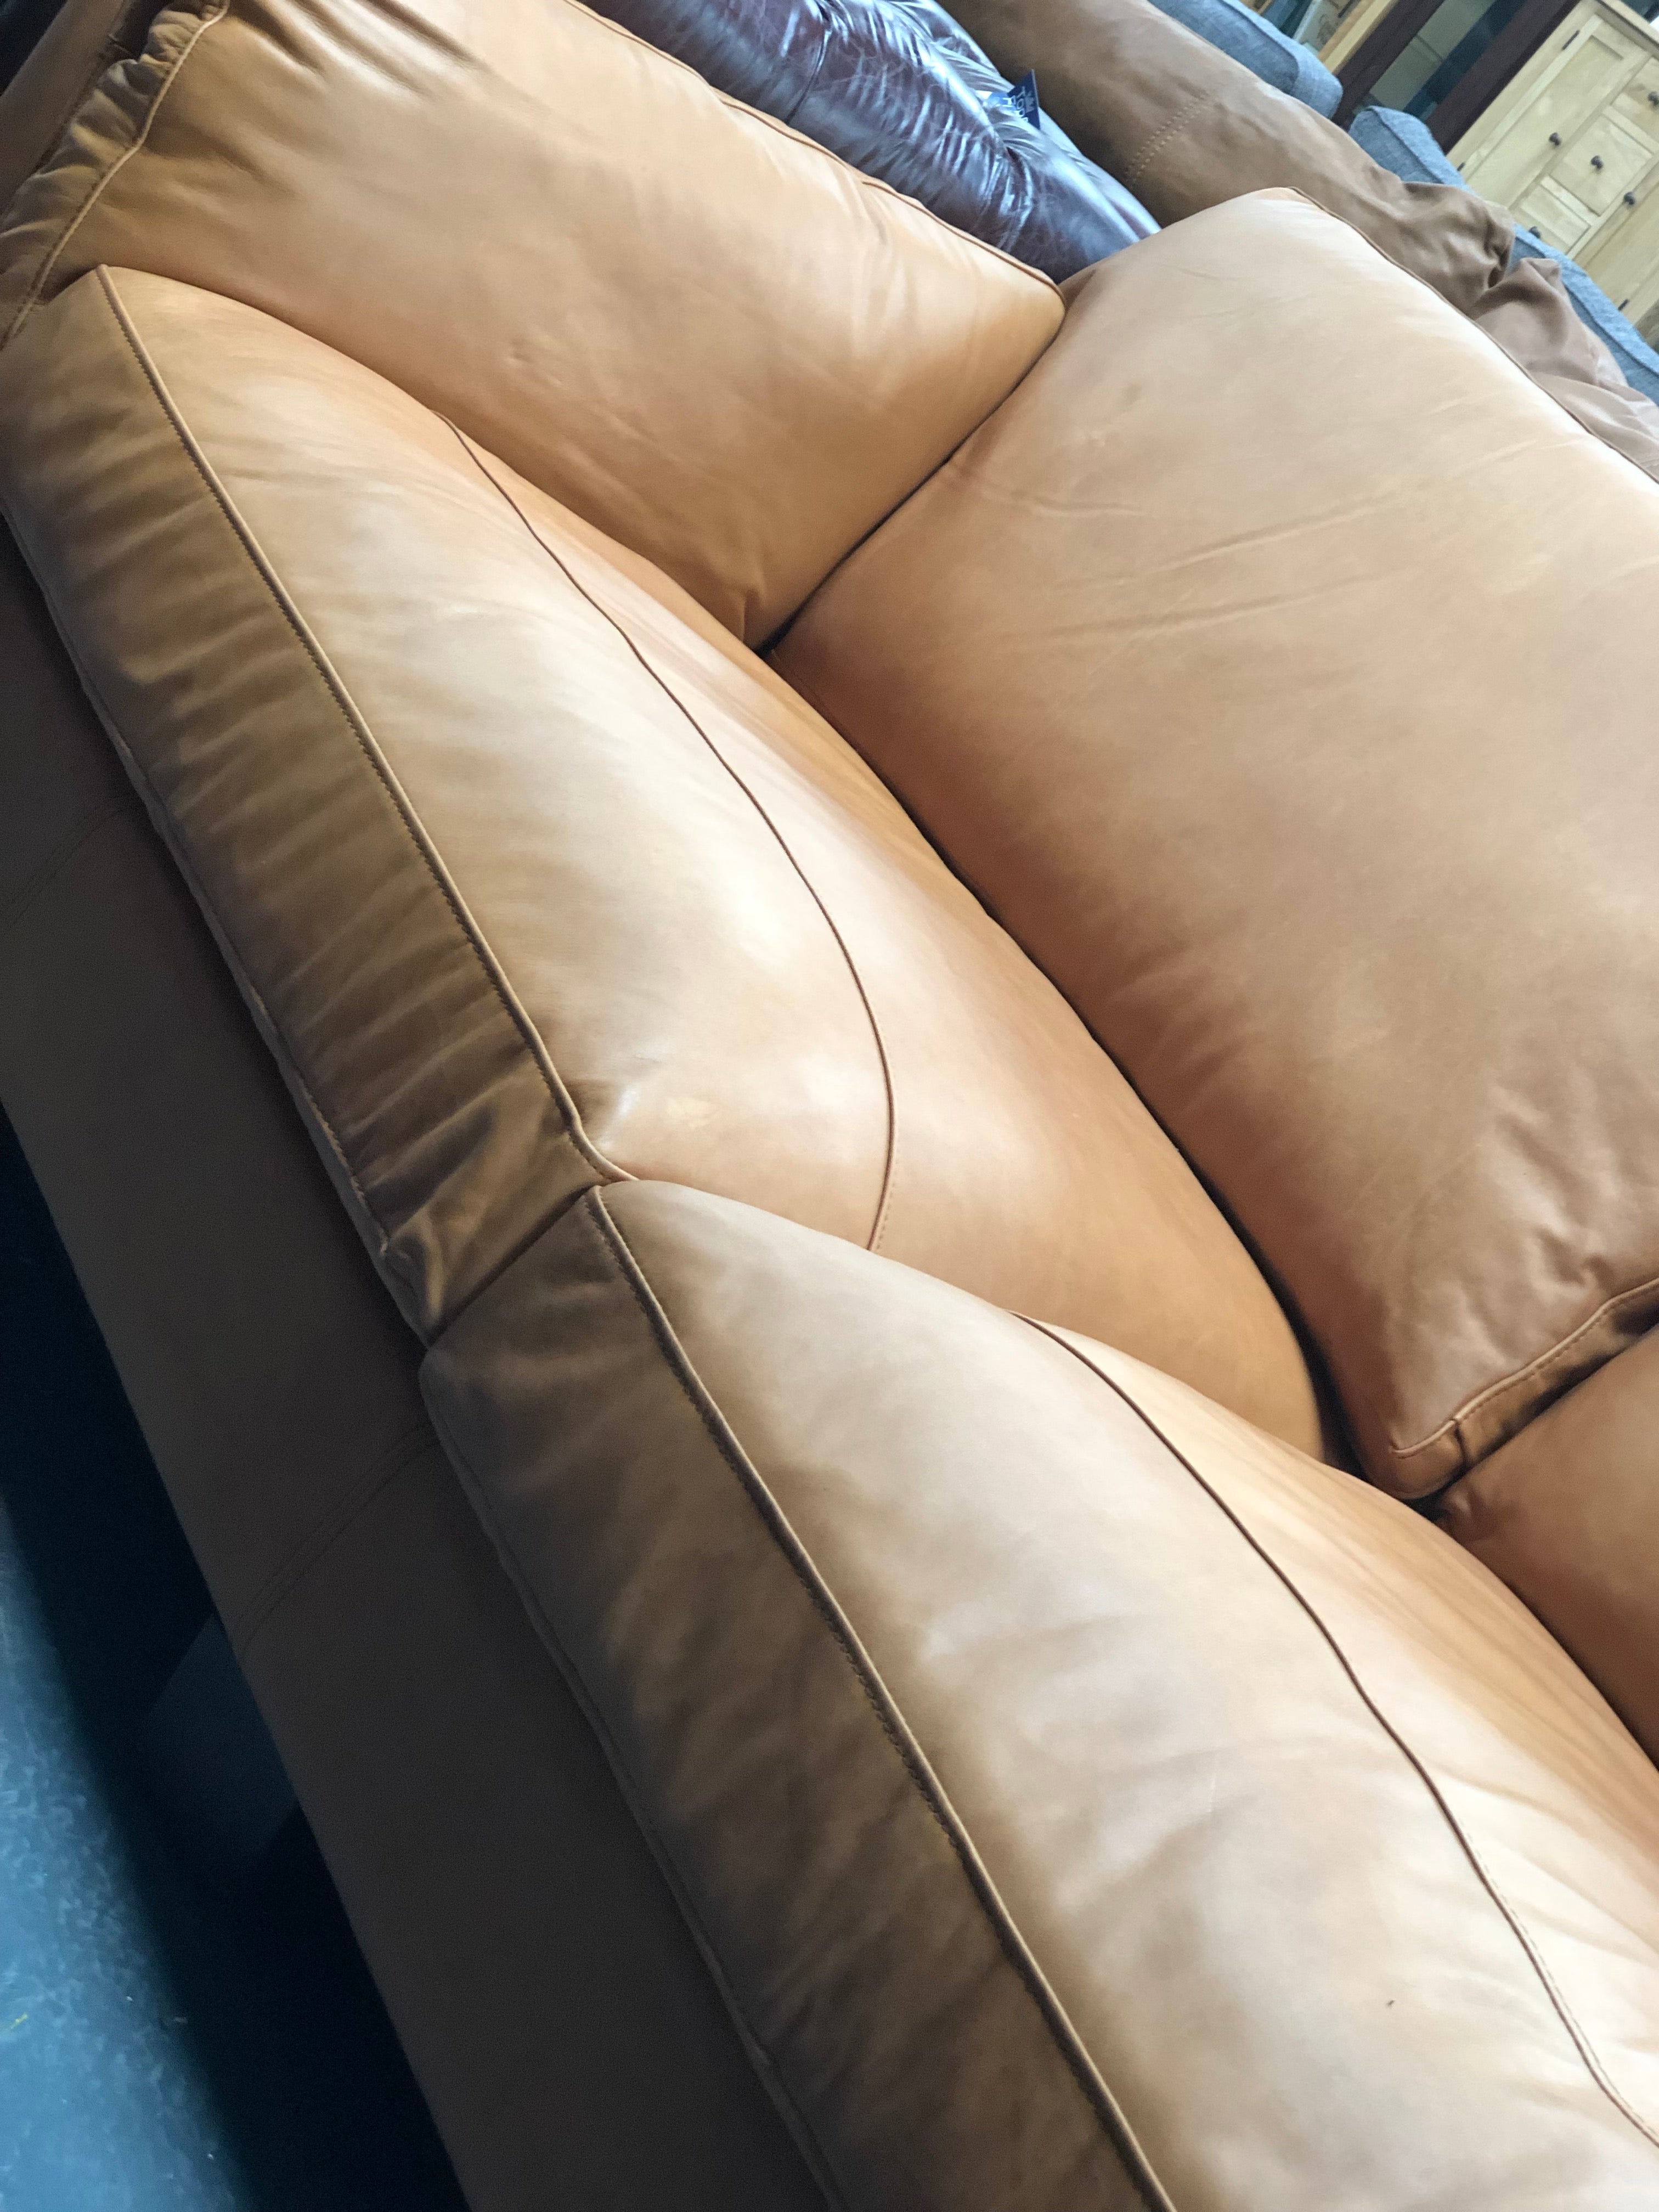 Halo Gable sofa from Top Secret Furniture